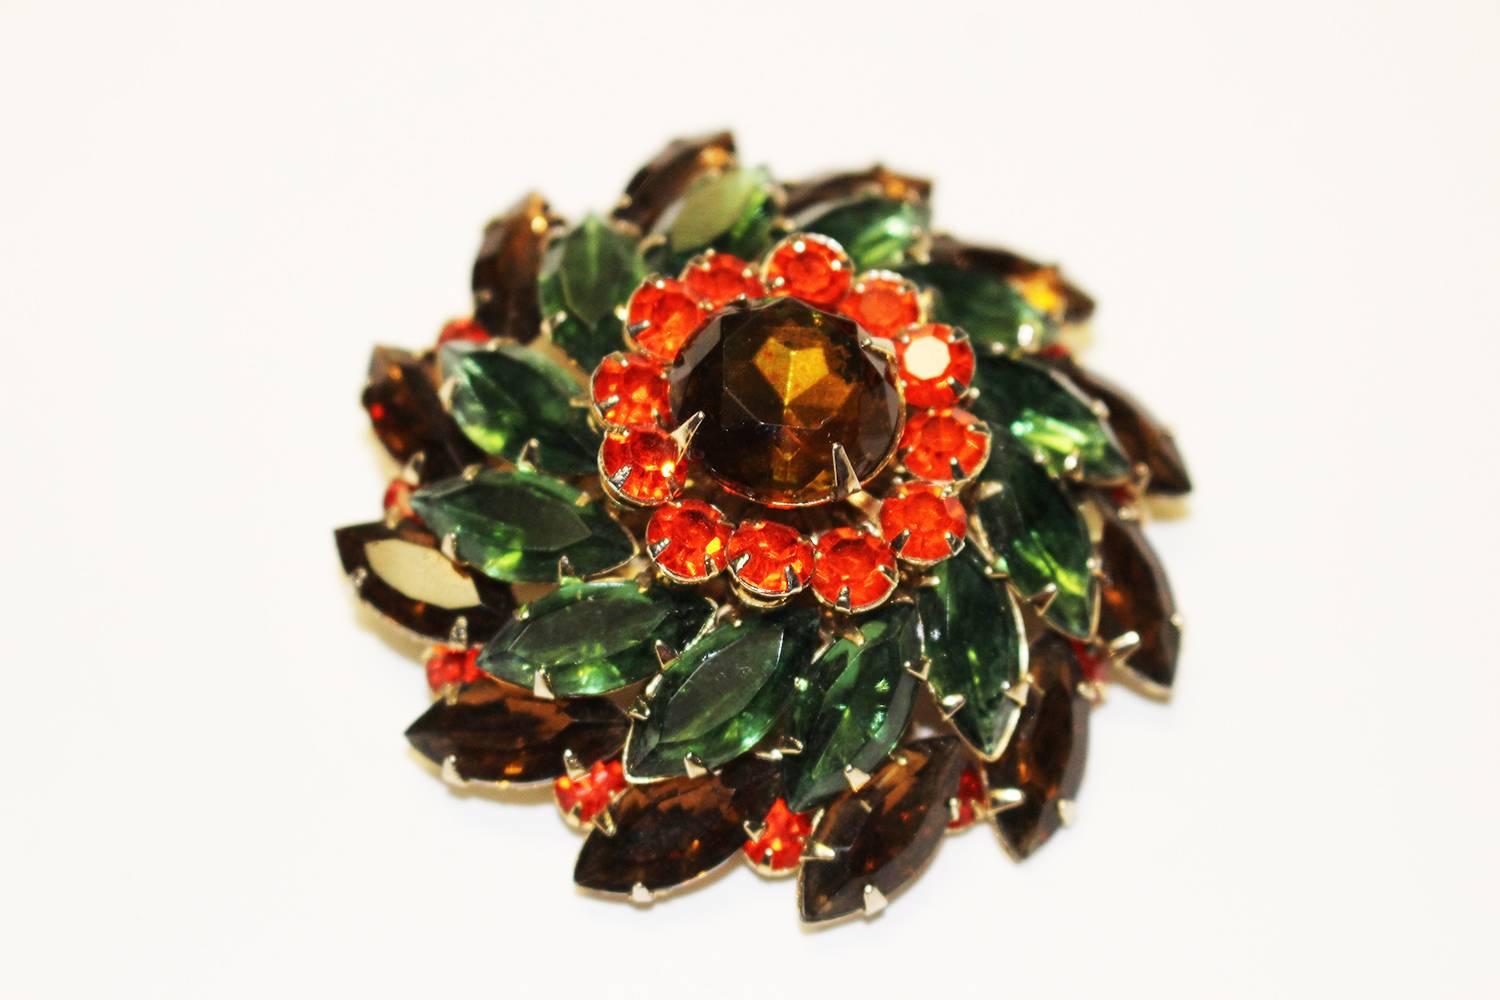 1960's earring and brooch set with green, brown, and flame orange rhinestones arranged in a starburst pattern by designer Judy Lee. Earrings are clip-on. This classic vintage brooch and earring set will compliment your ensemble! 